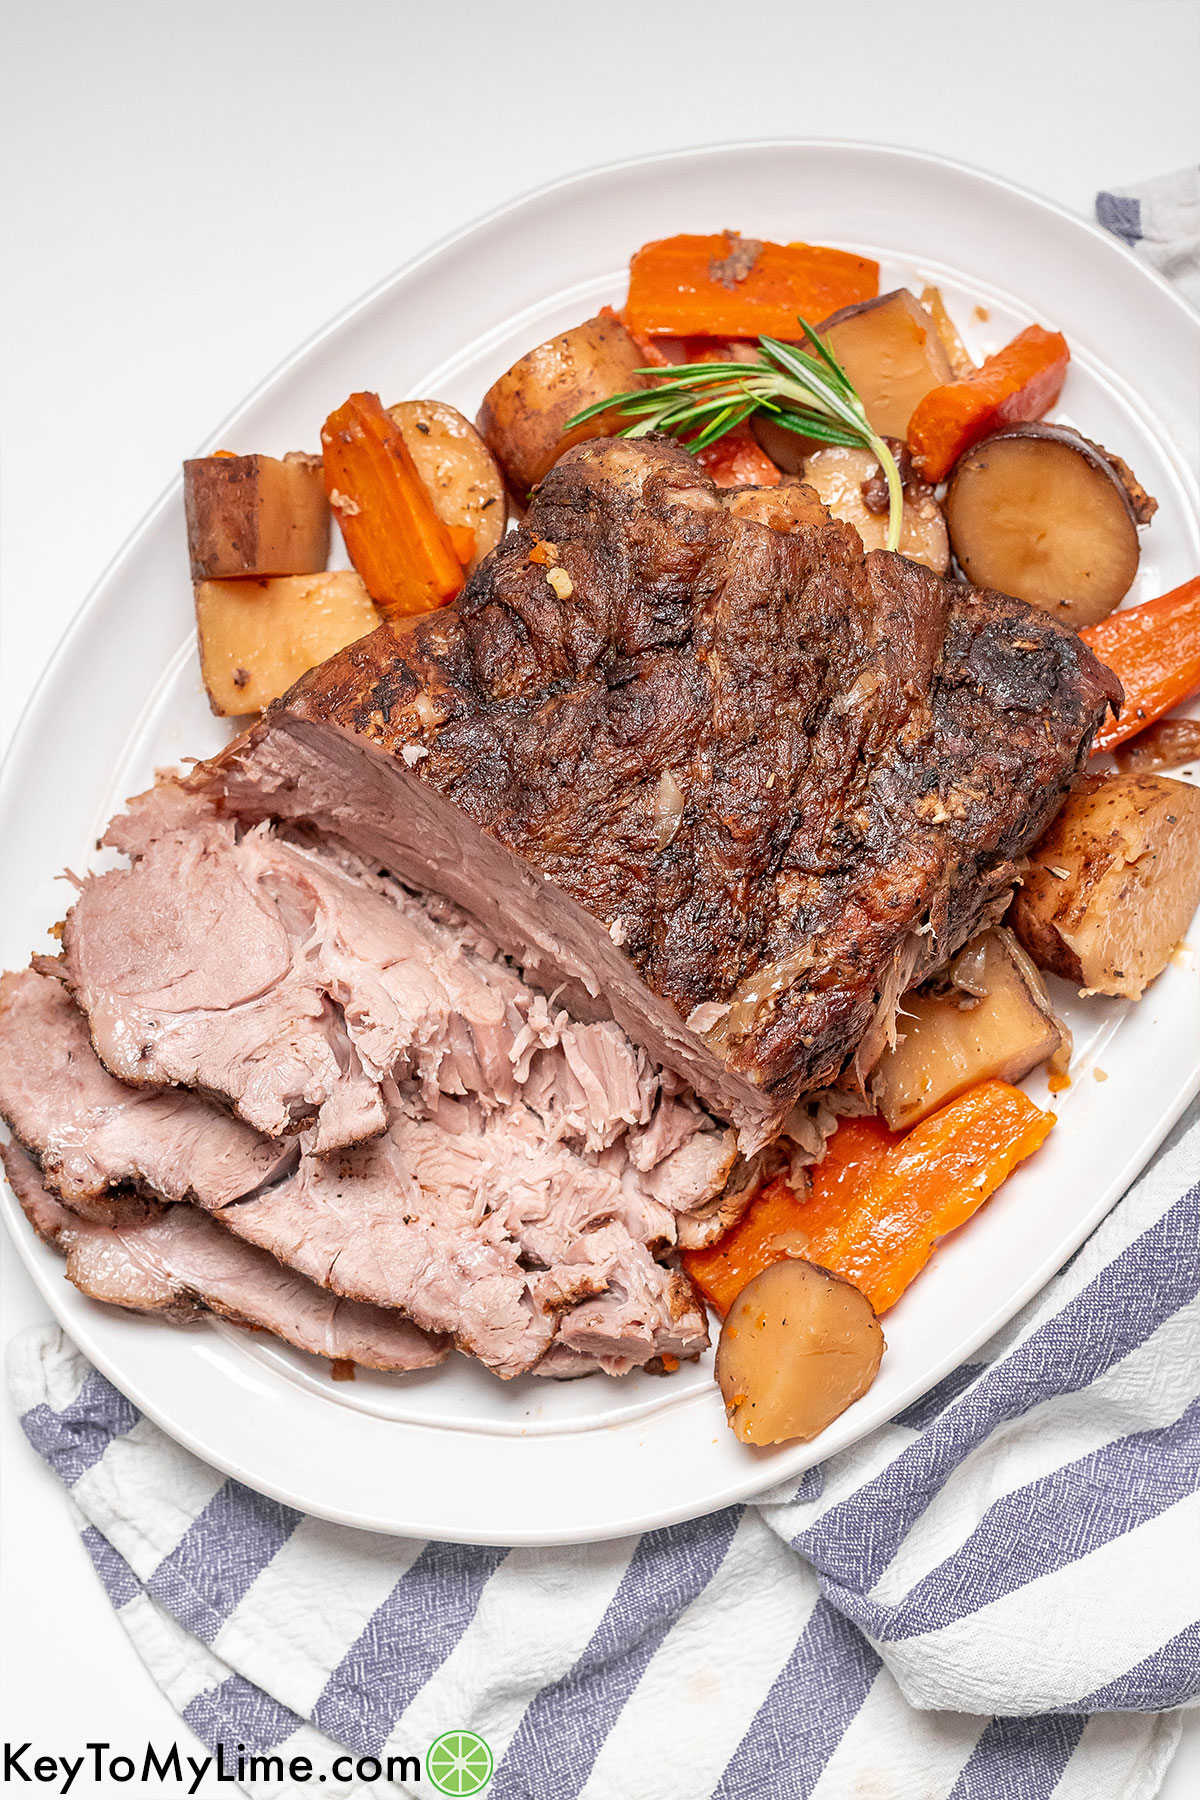 An overhead image of a shredded pork roast on a platter with carrots and potatoes.